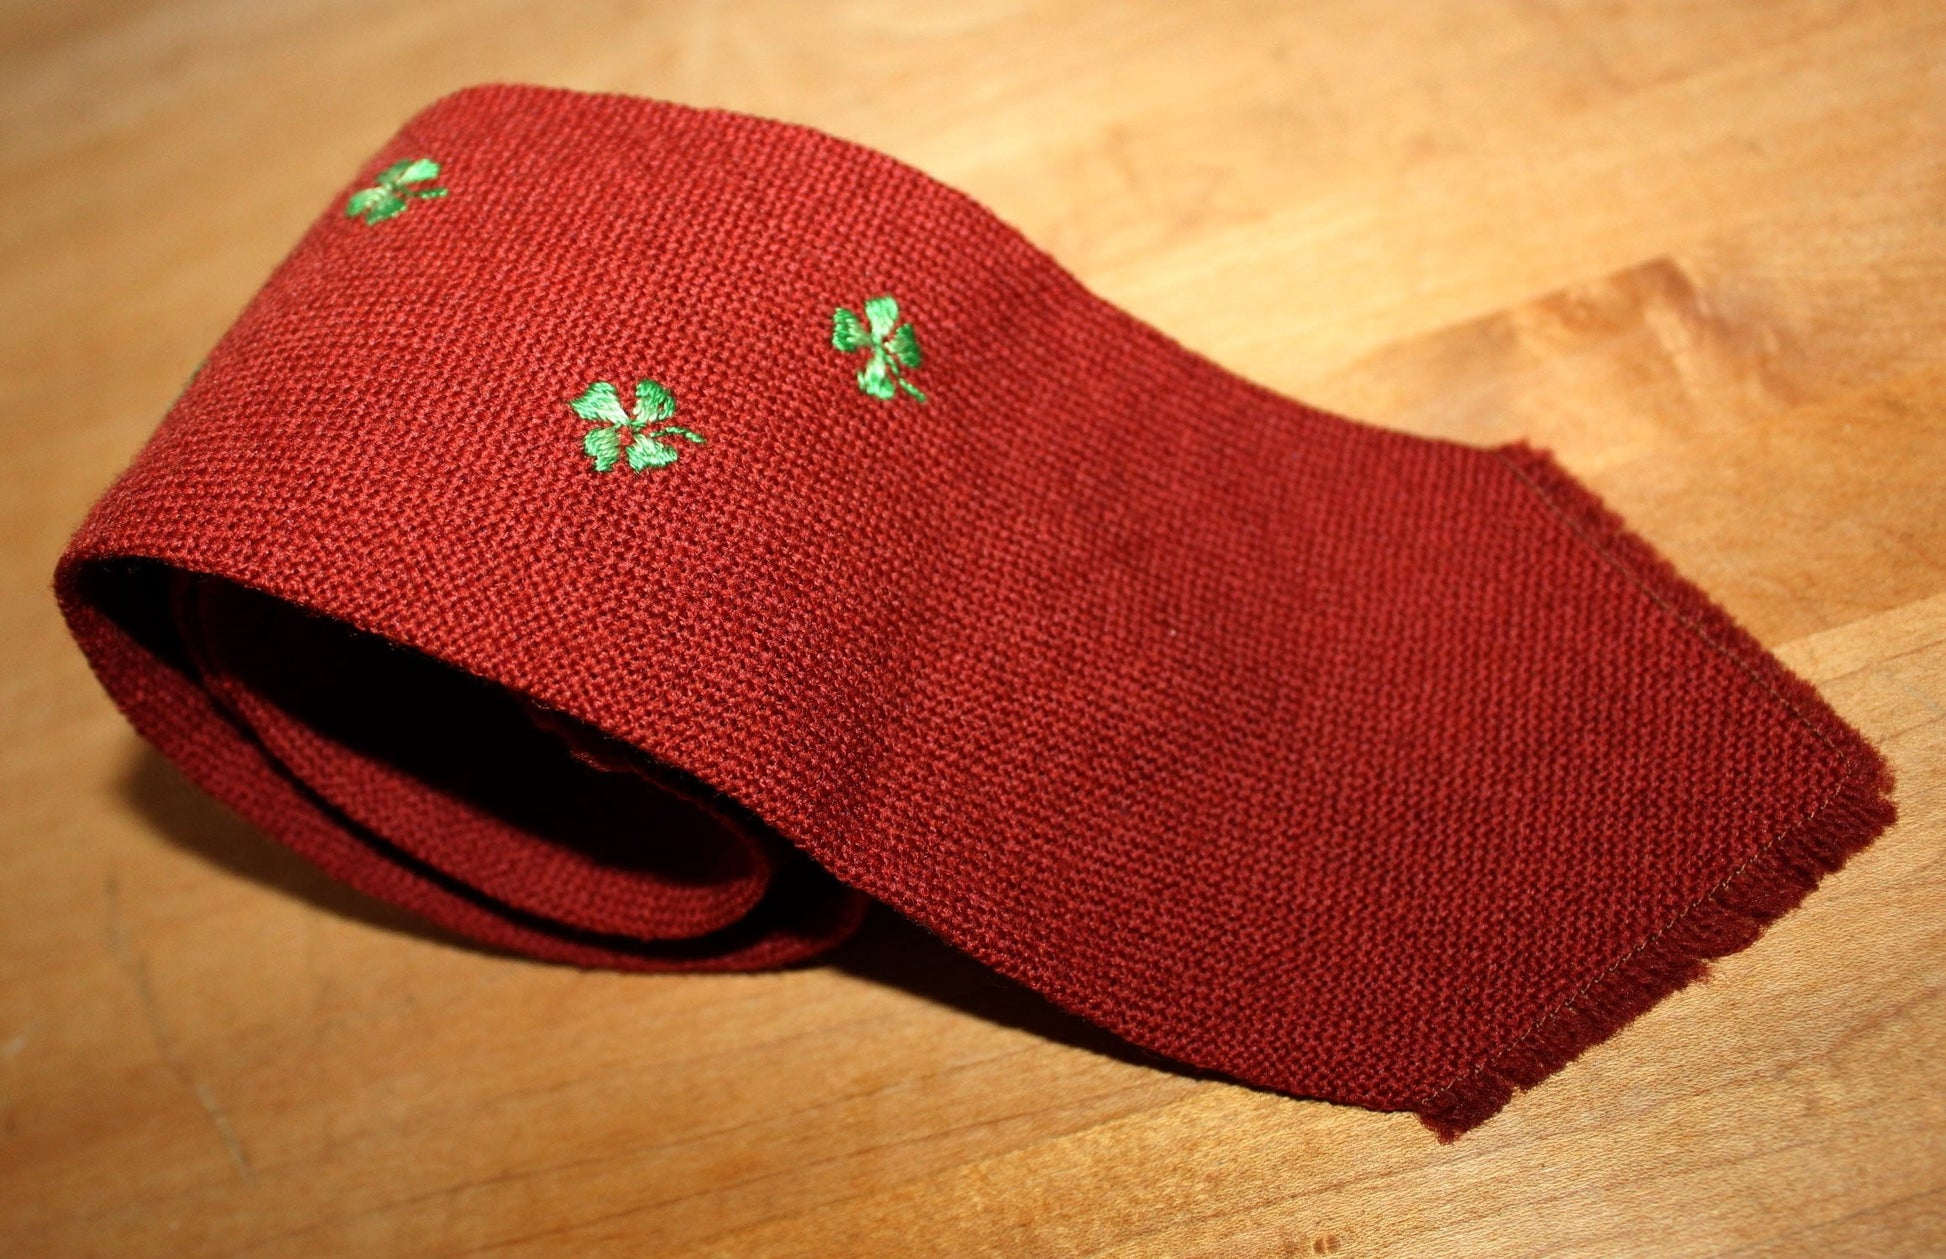 TEWA Embroidered Wool Necktie - Native American Hand Loomed - Santa Fe Mkt color red peppers